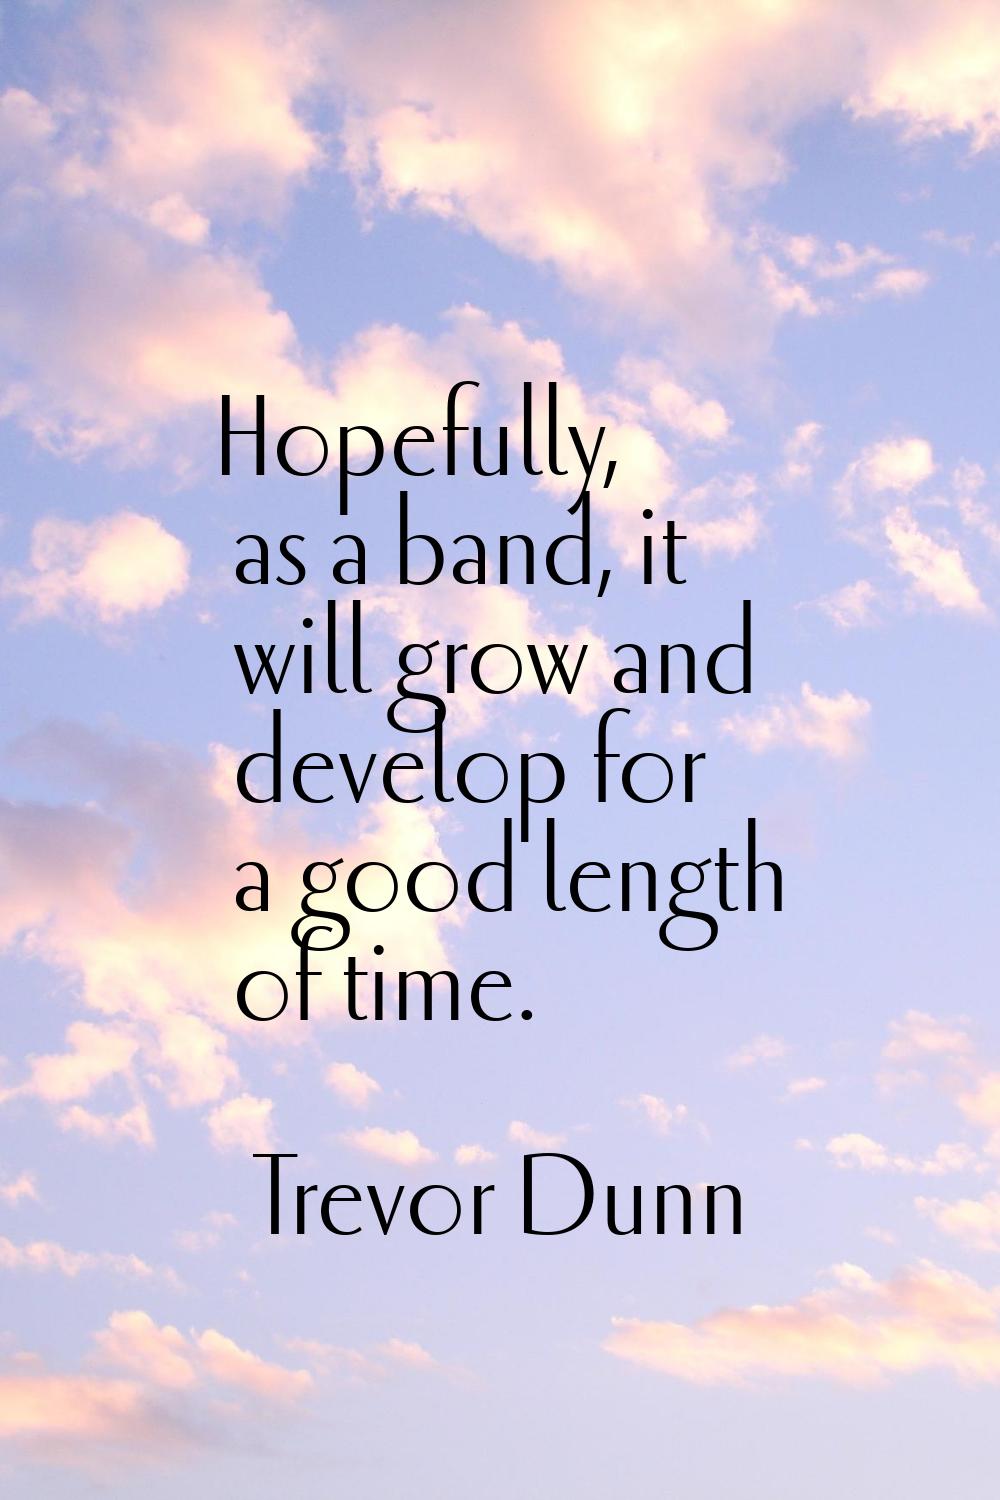 Hopefully, as a band, it will grow and develop for a good length of time.